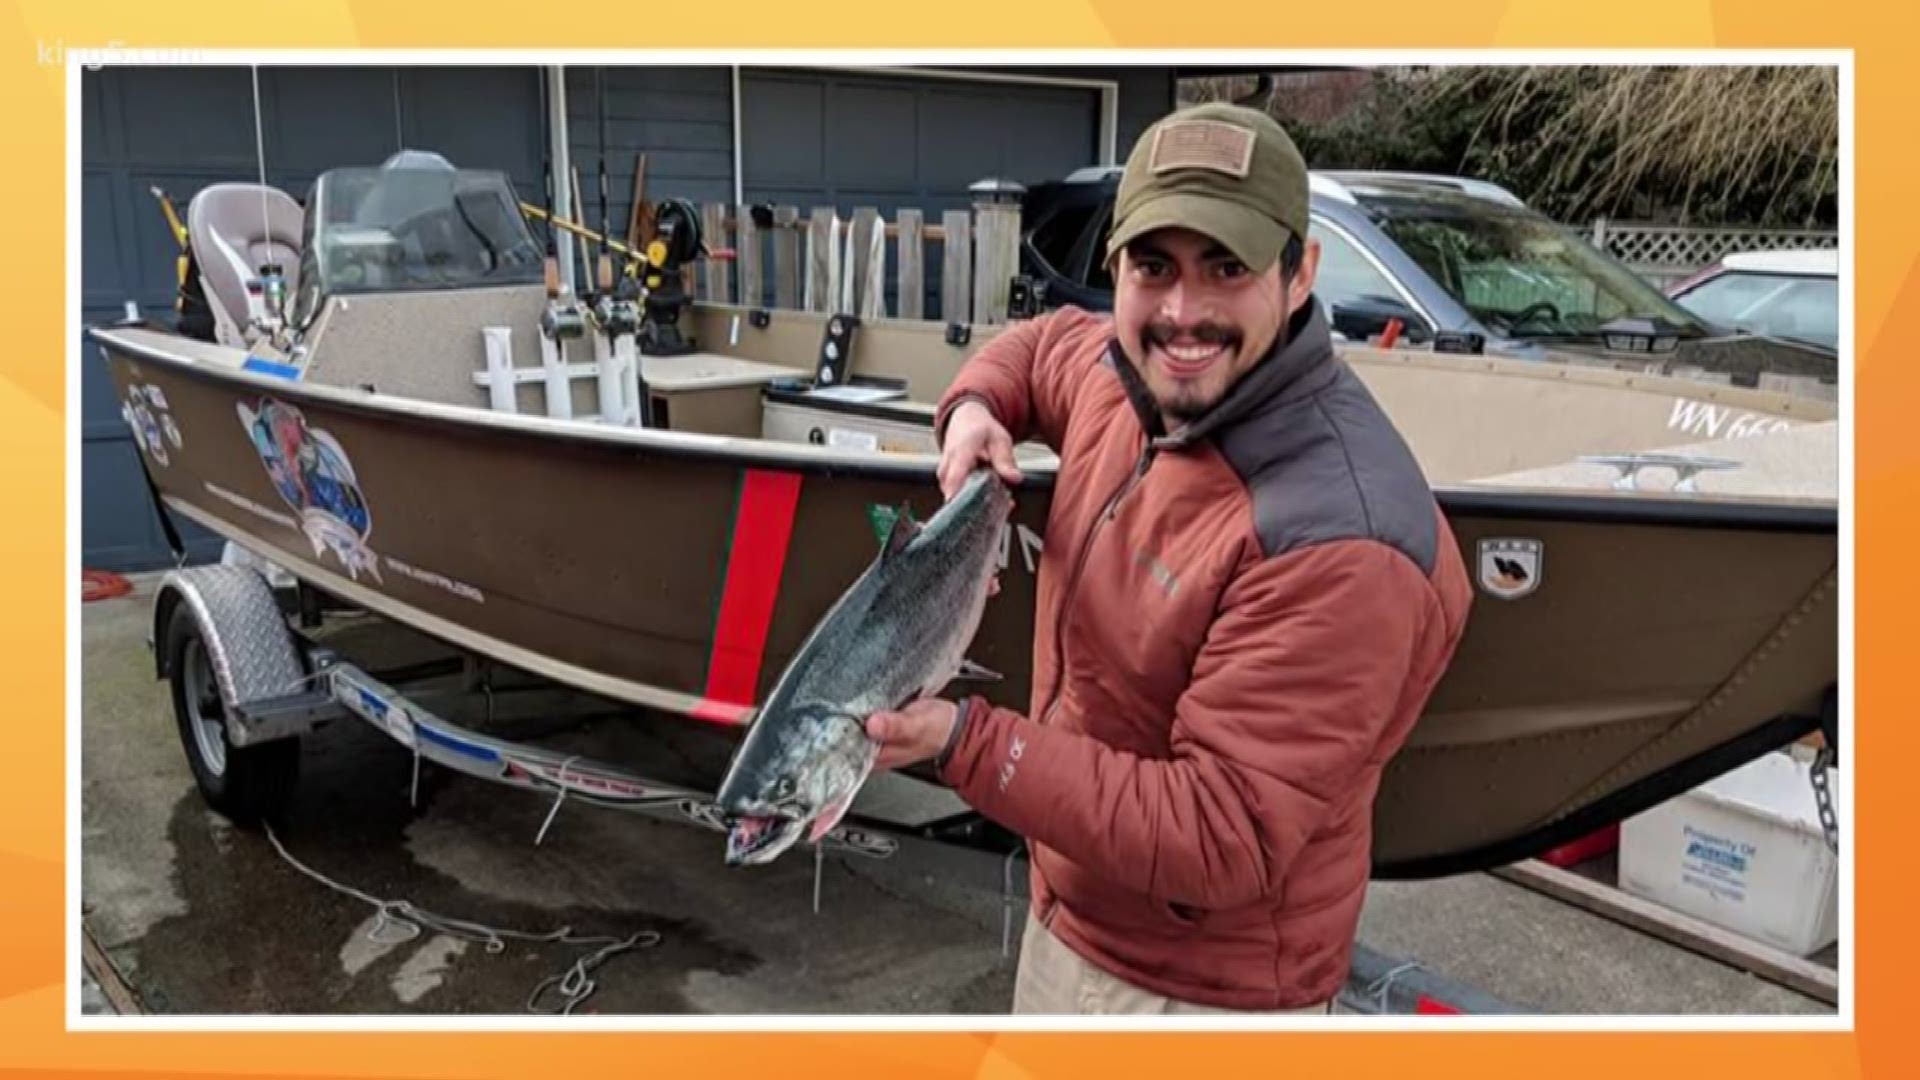 A lot of people assume fishing just means sitting around in a boat waiting for your line to bob up and down. But fishing can also do wonders for one's mental health and well-being. KING 5's Jordan Steele has the story on Take 5.